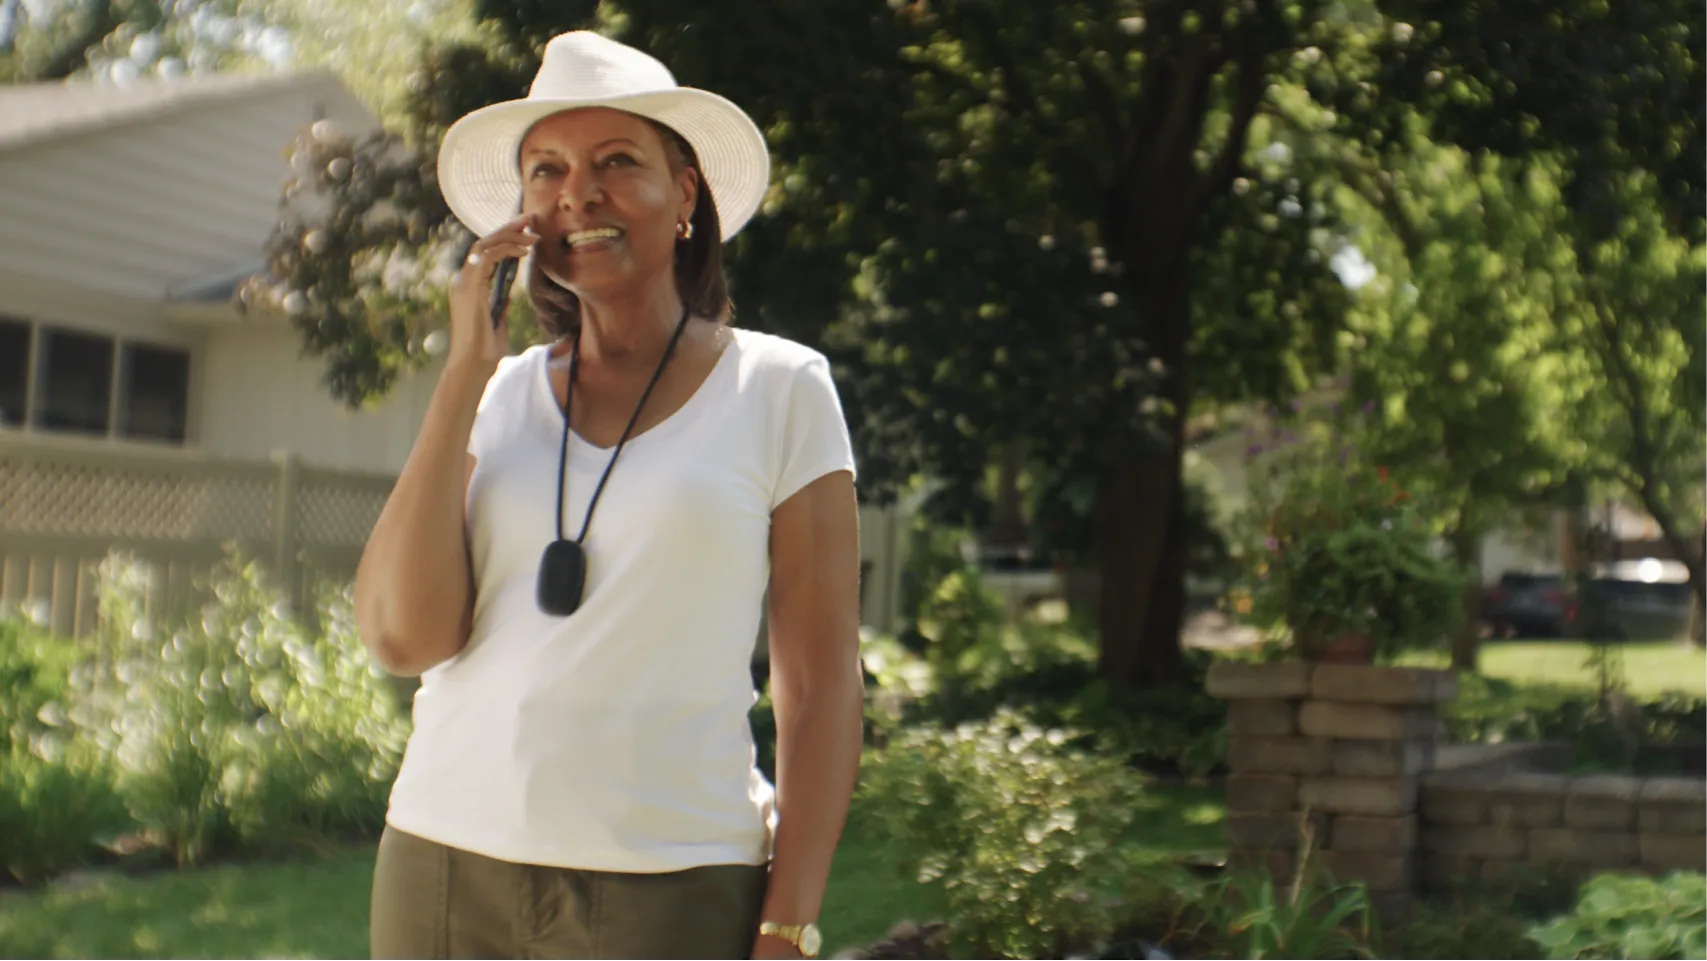 A woman dressed in a white shirt and hat, talks on the phone and smiles in her garden while wearing a Personal Emergency Response pendant.